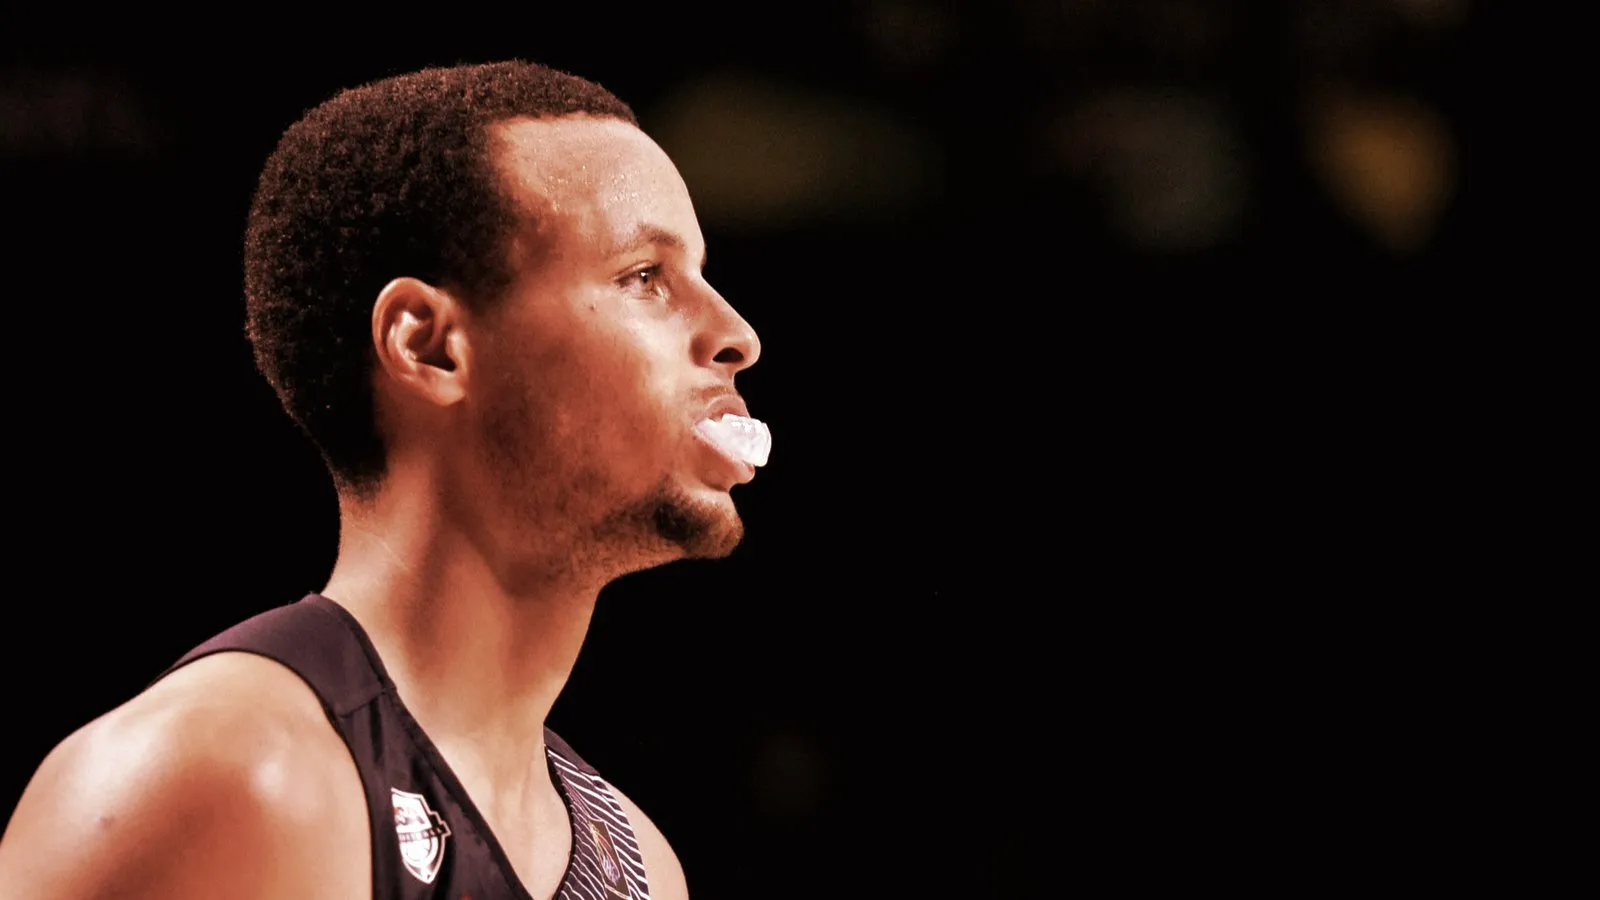 Steph Curry in 2014. Image: Shutterstock